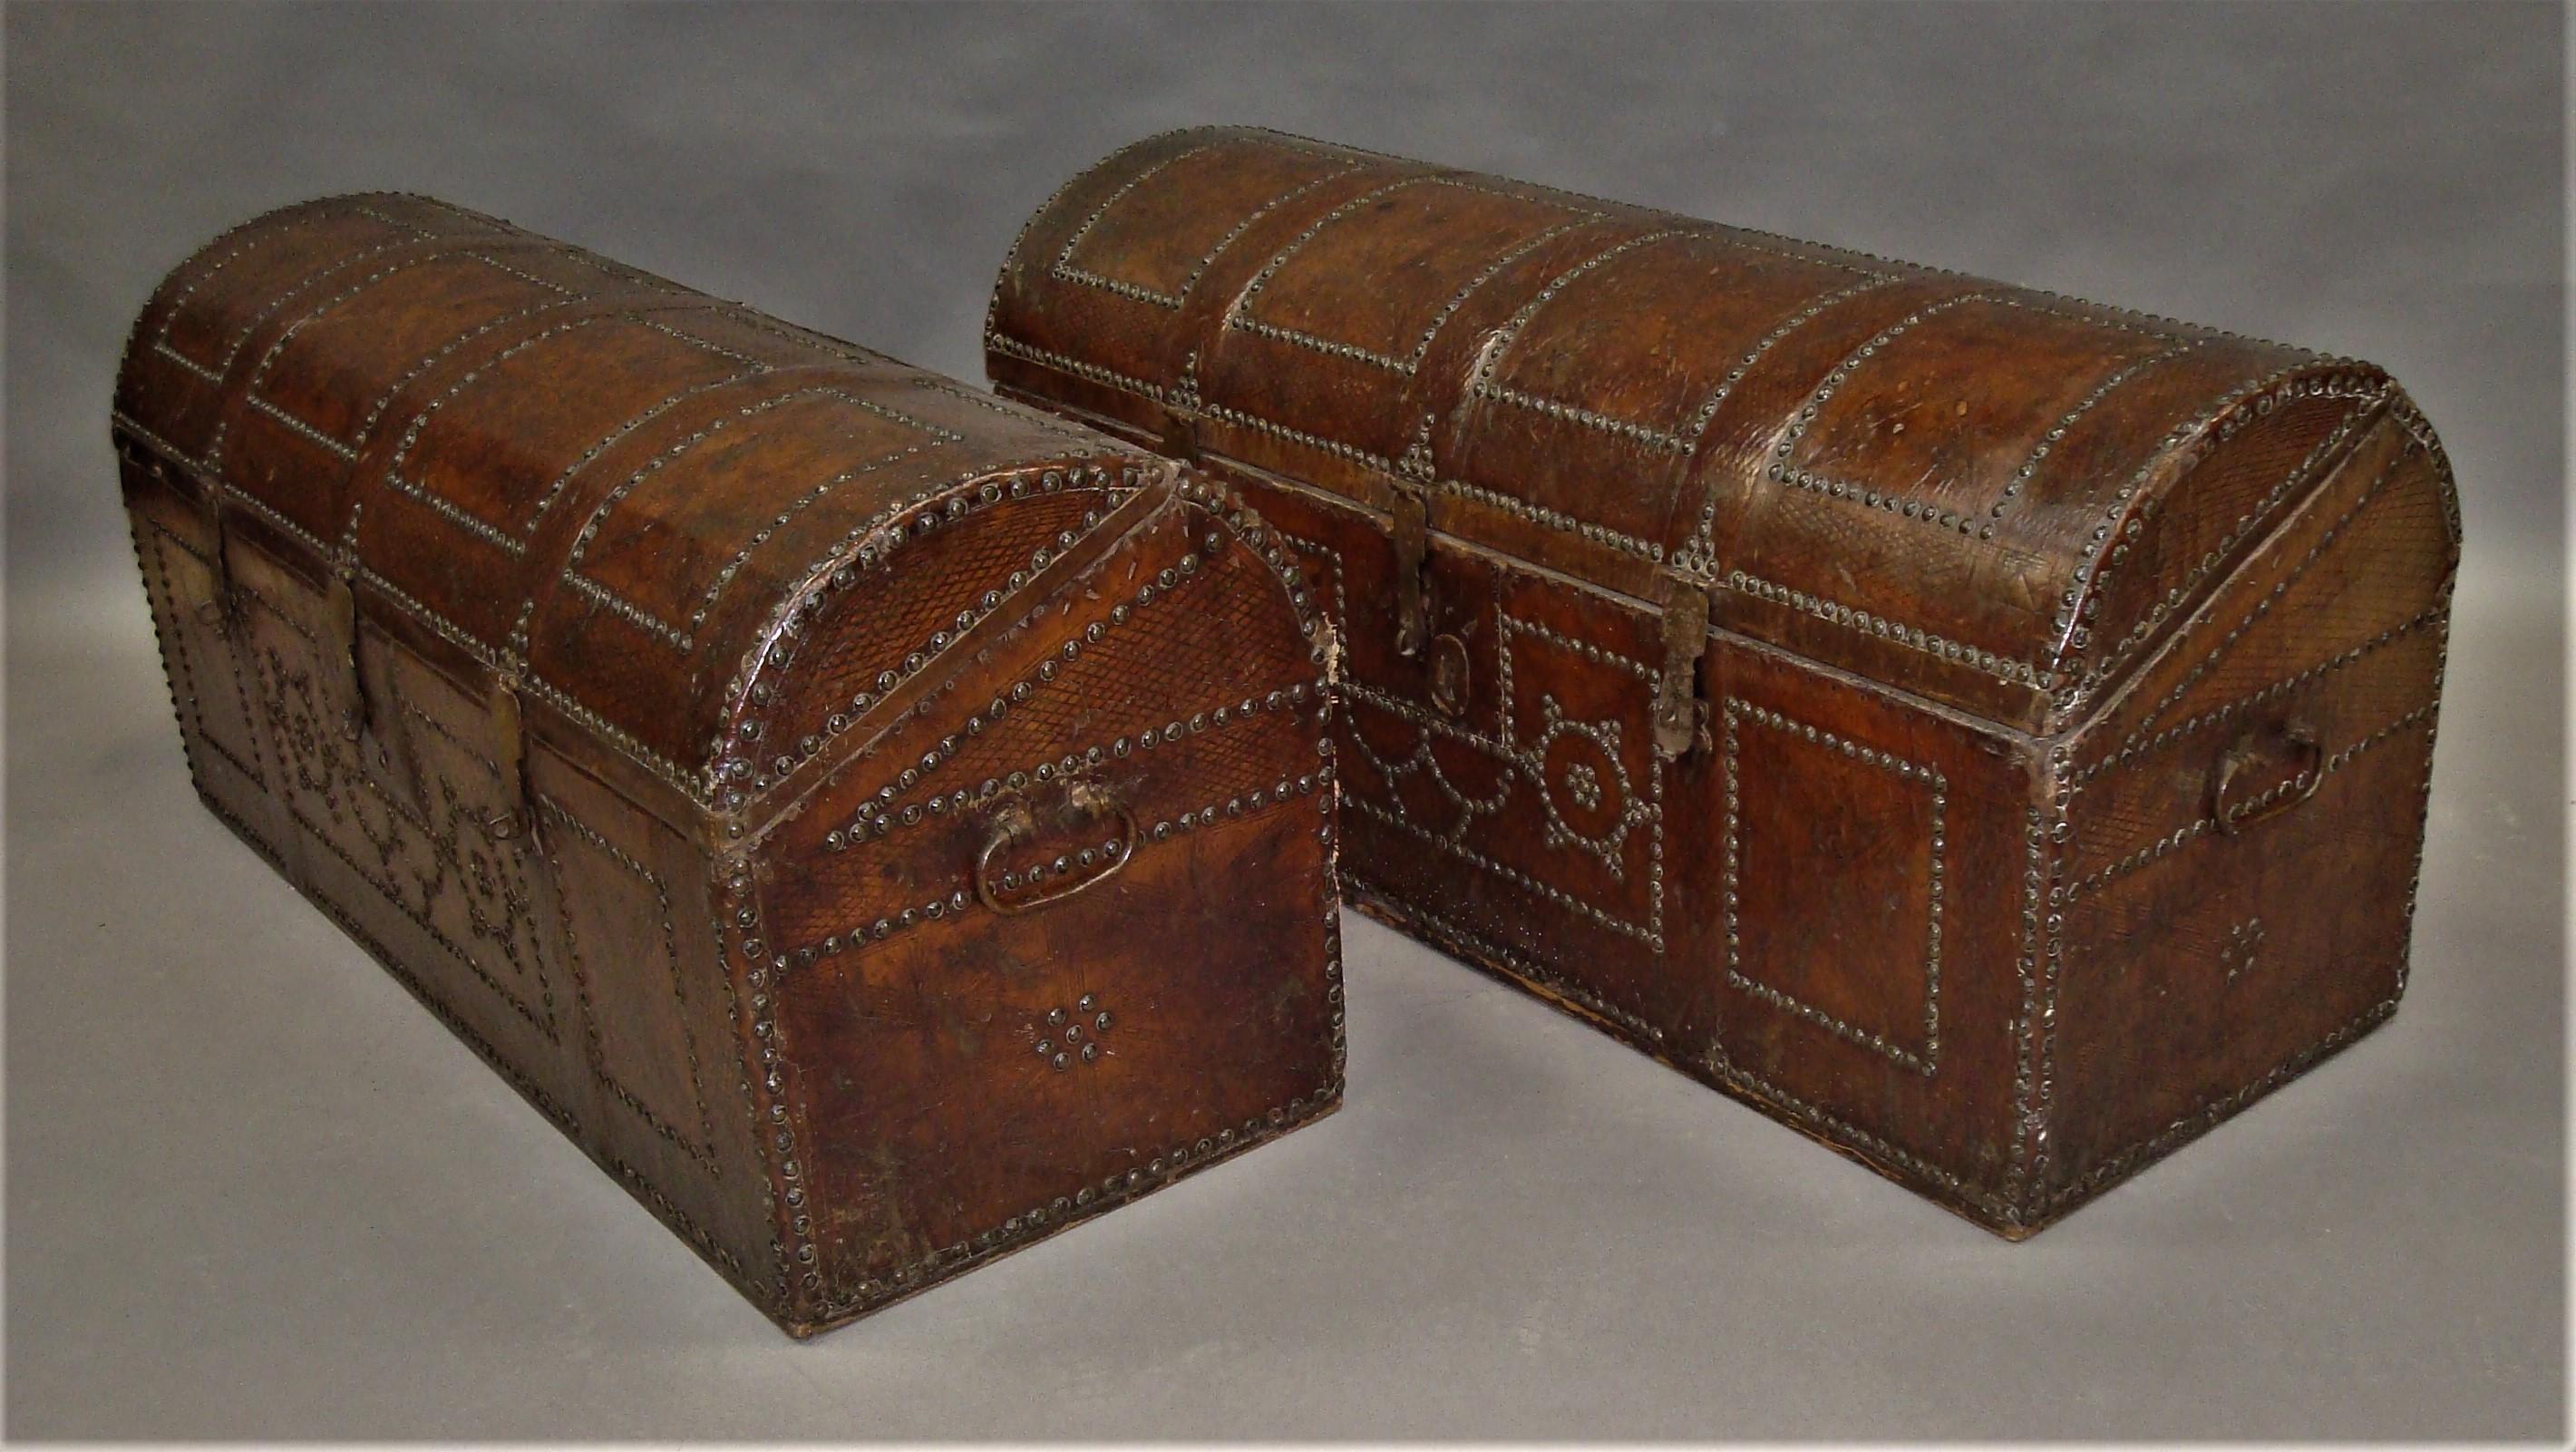 Polished 18th Century Pair of Spanish Leather Travelling Trunks Chests For Sale